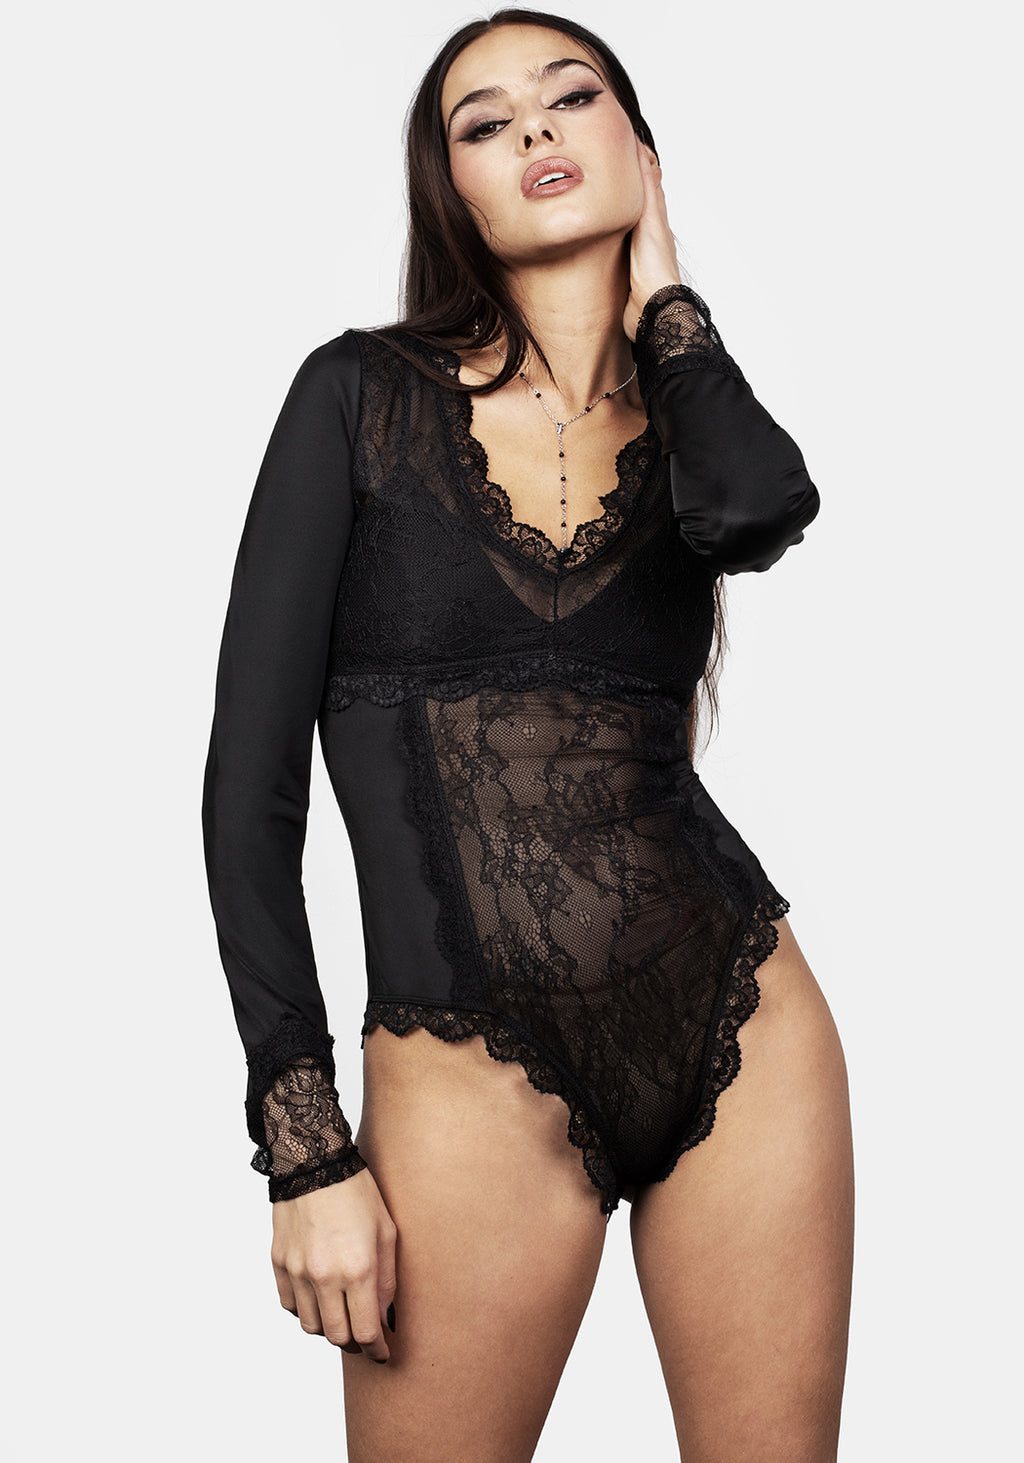 Lace Up Catsuit for €69.99 - Onesies - Hunkemöller